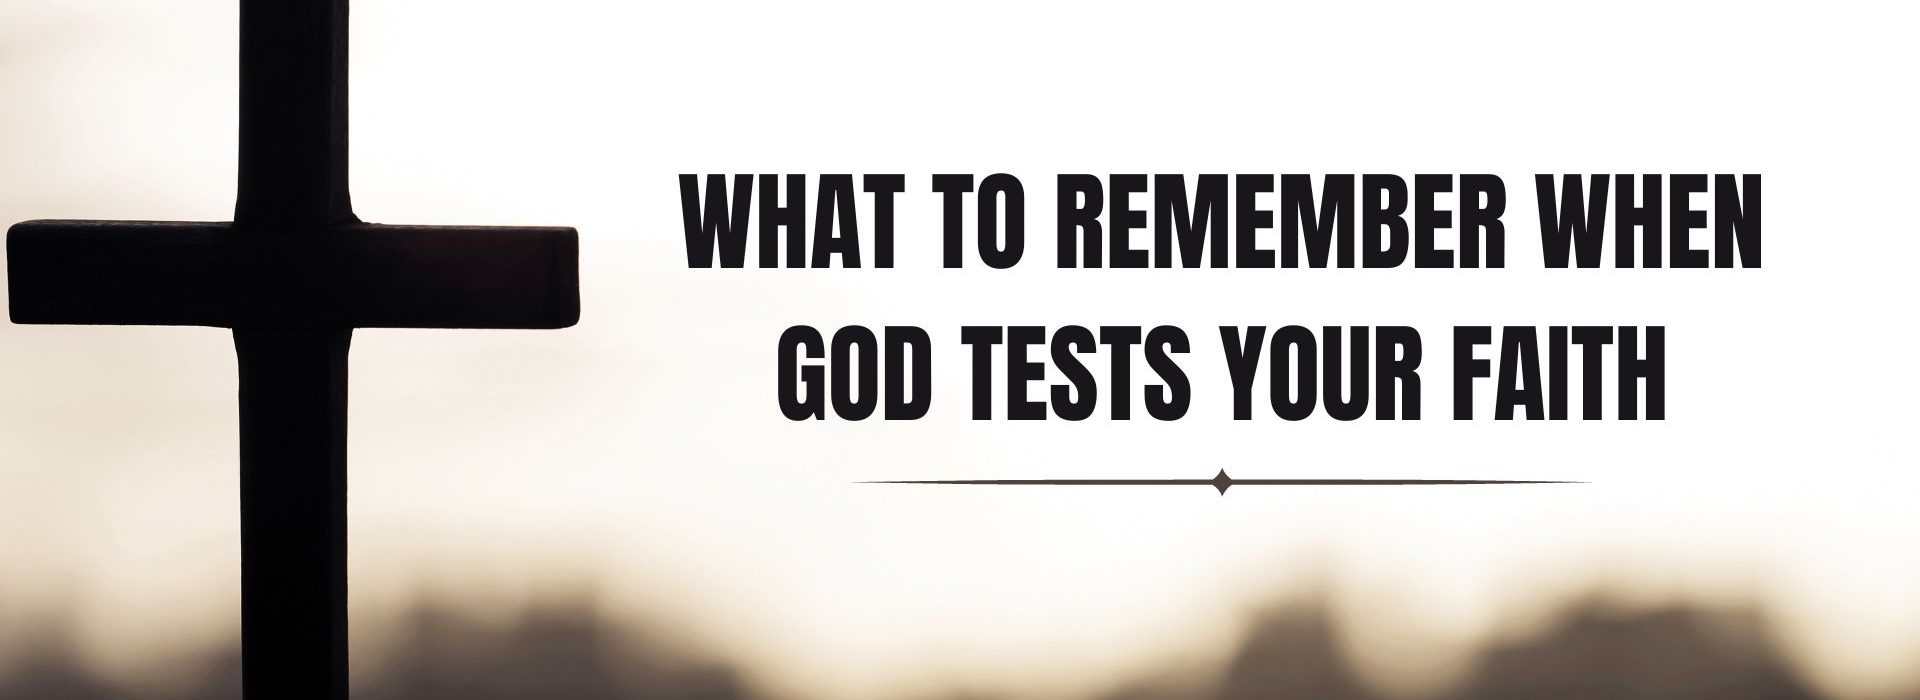 What To Remember When God Tests Your Faith